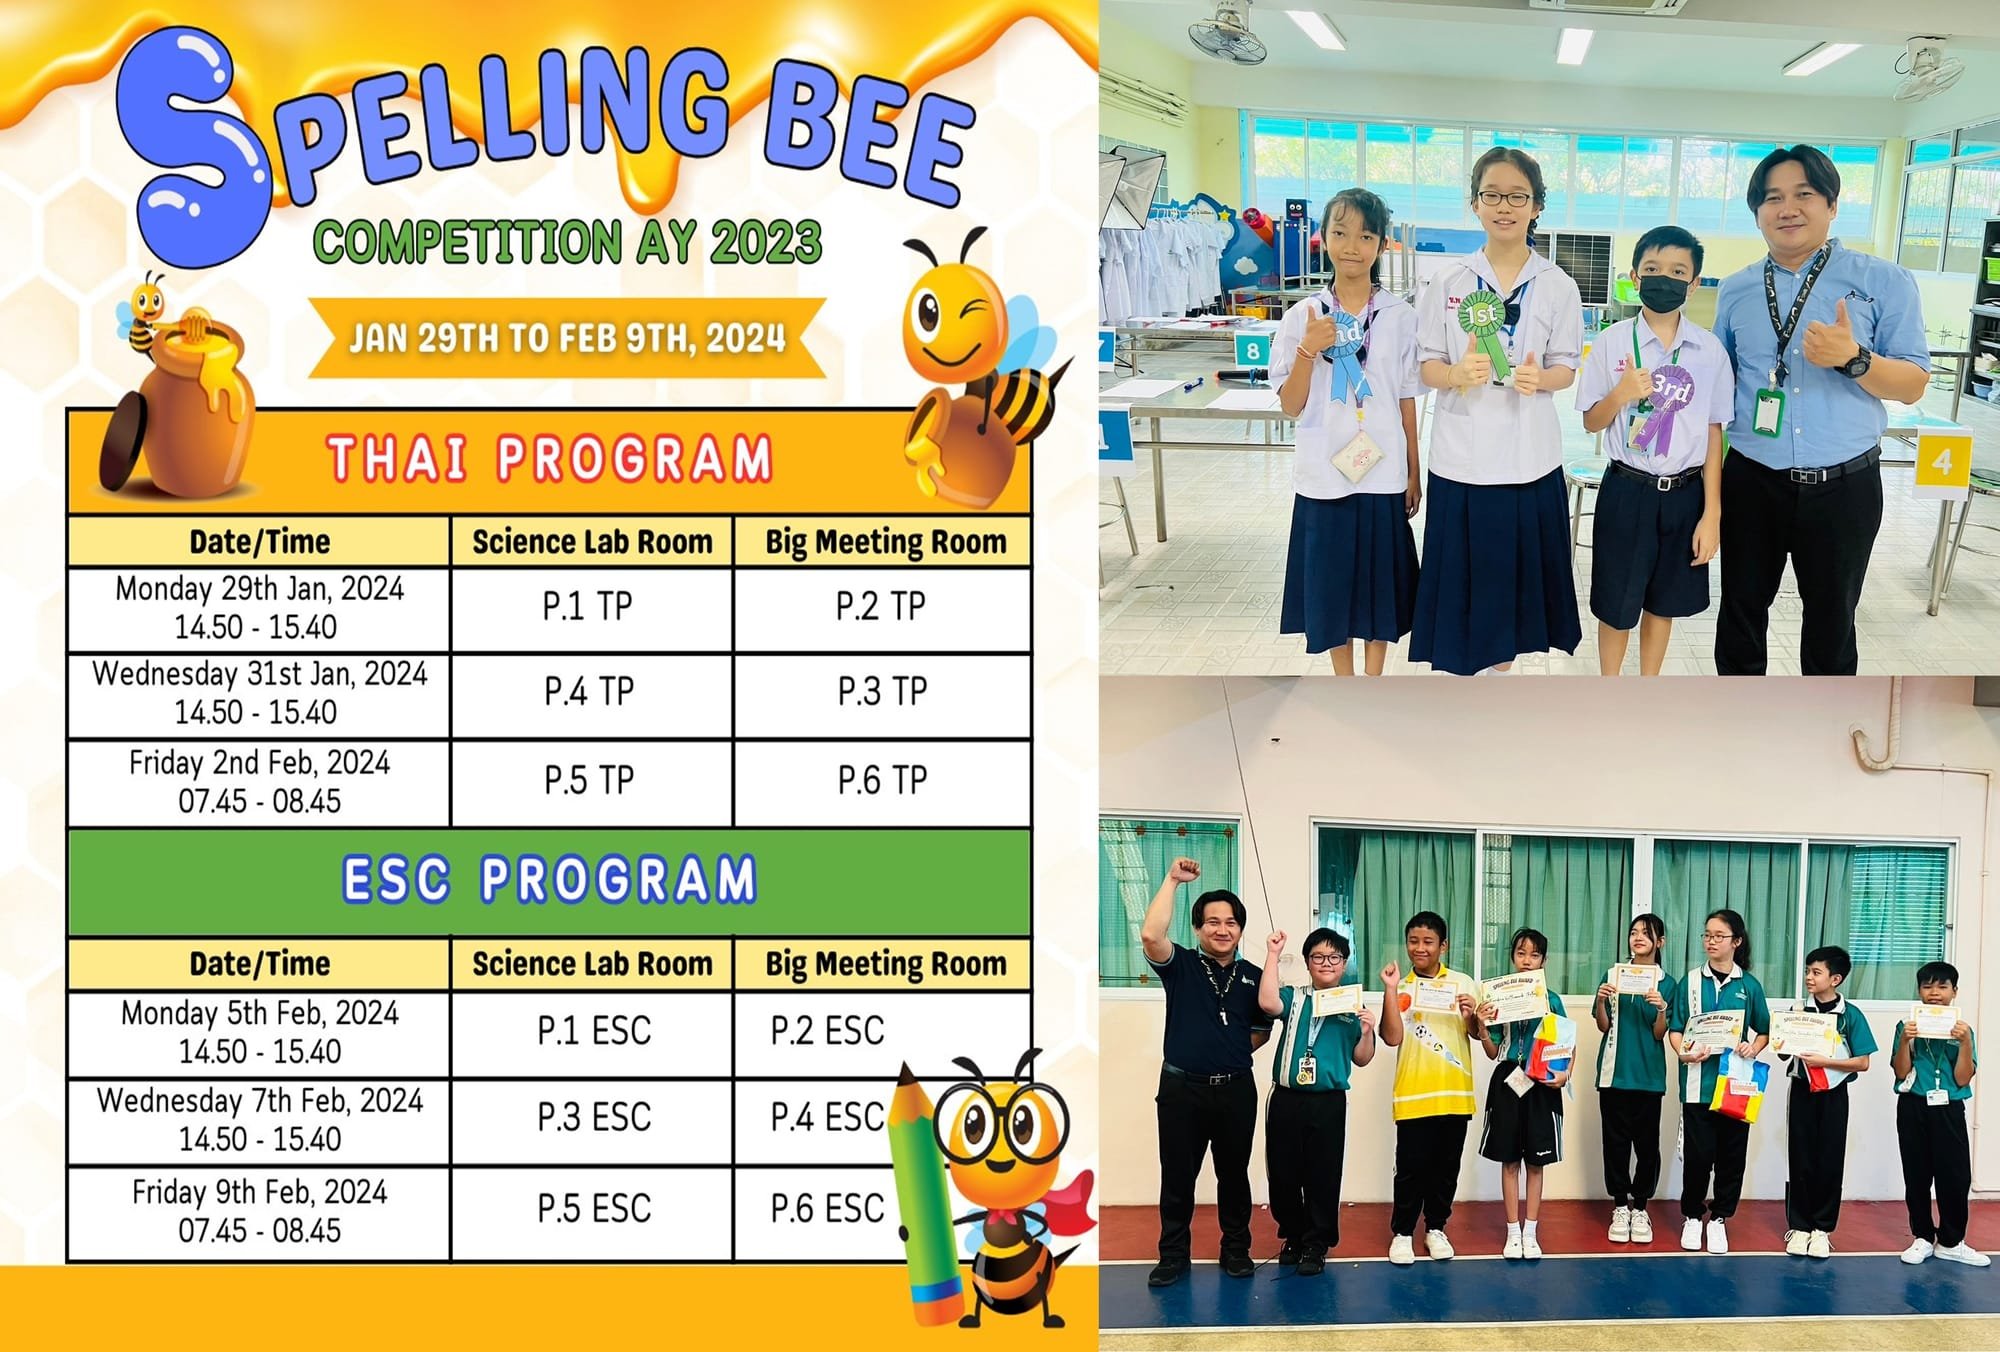 Spelling Bee 2023 Competition, 2nd February 2024